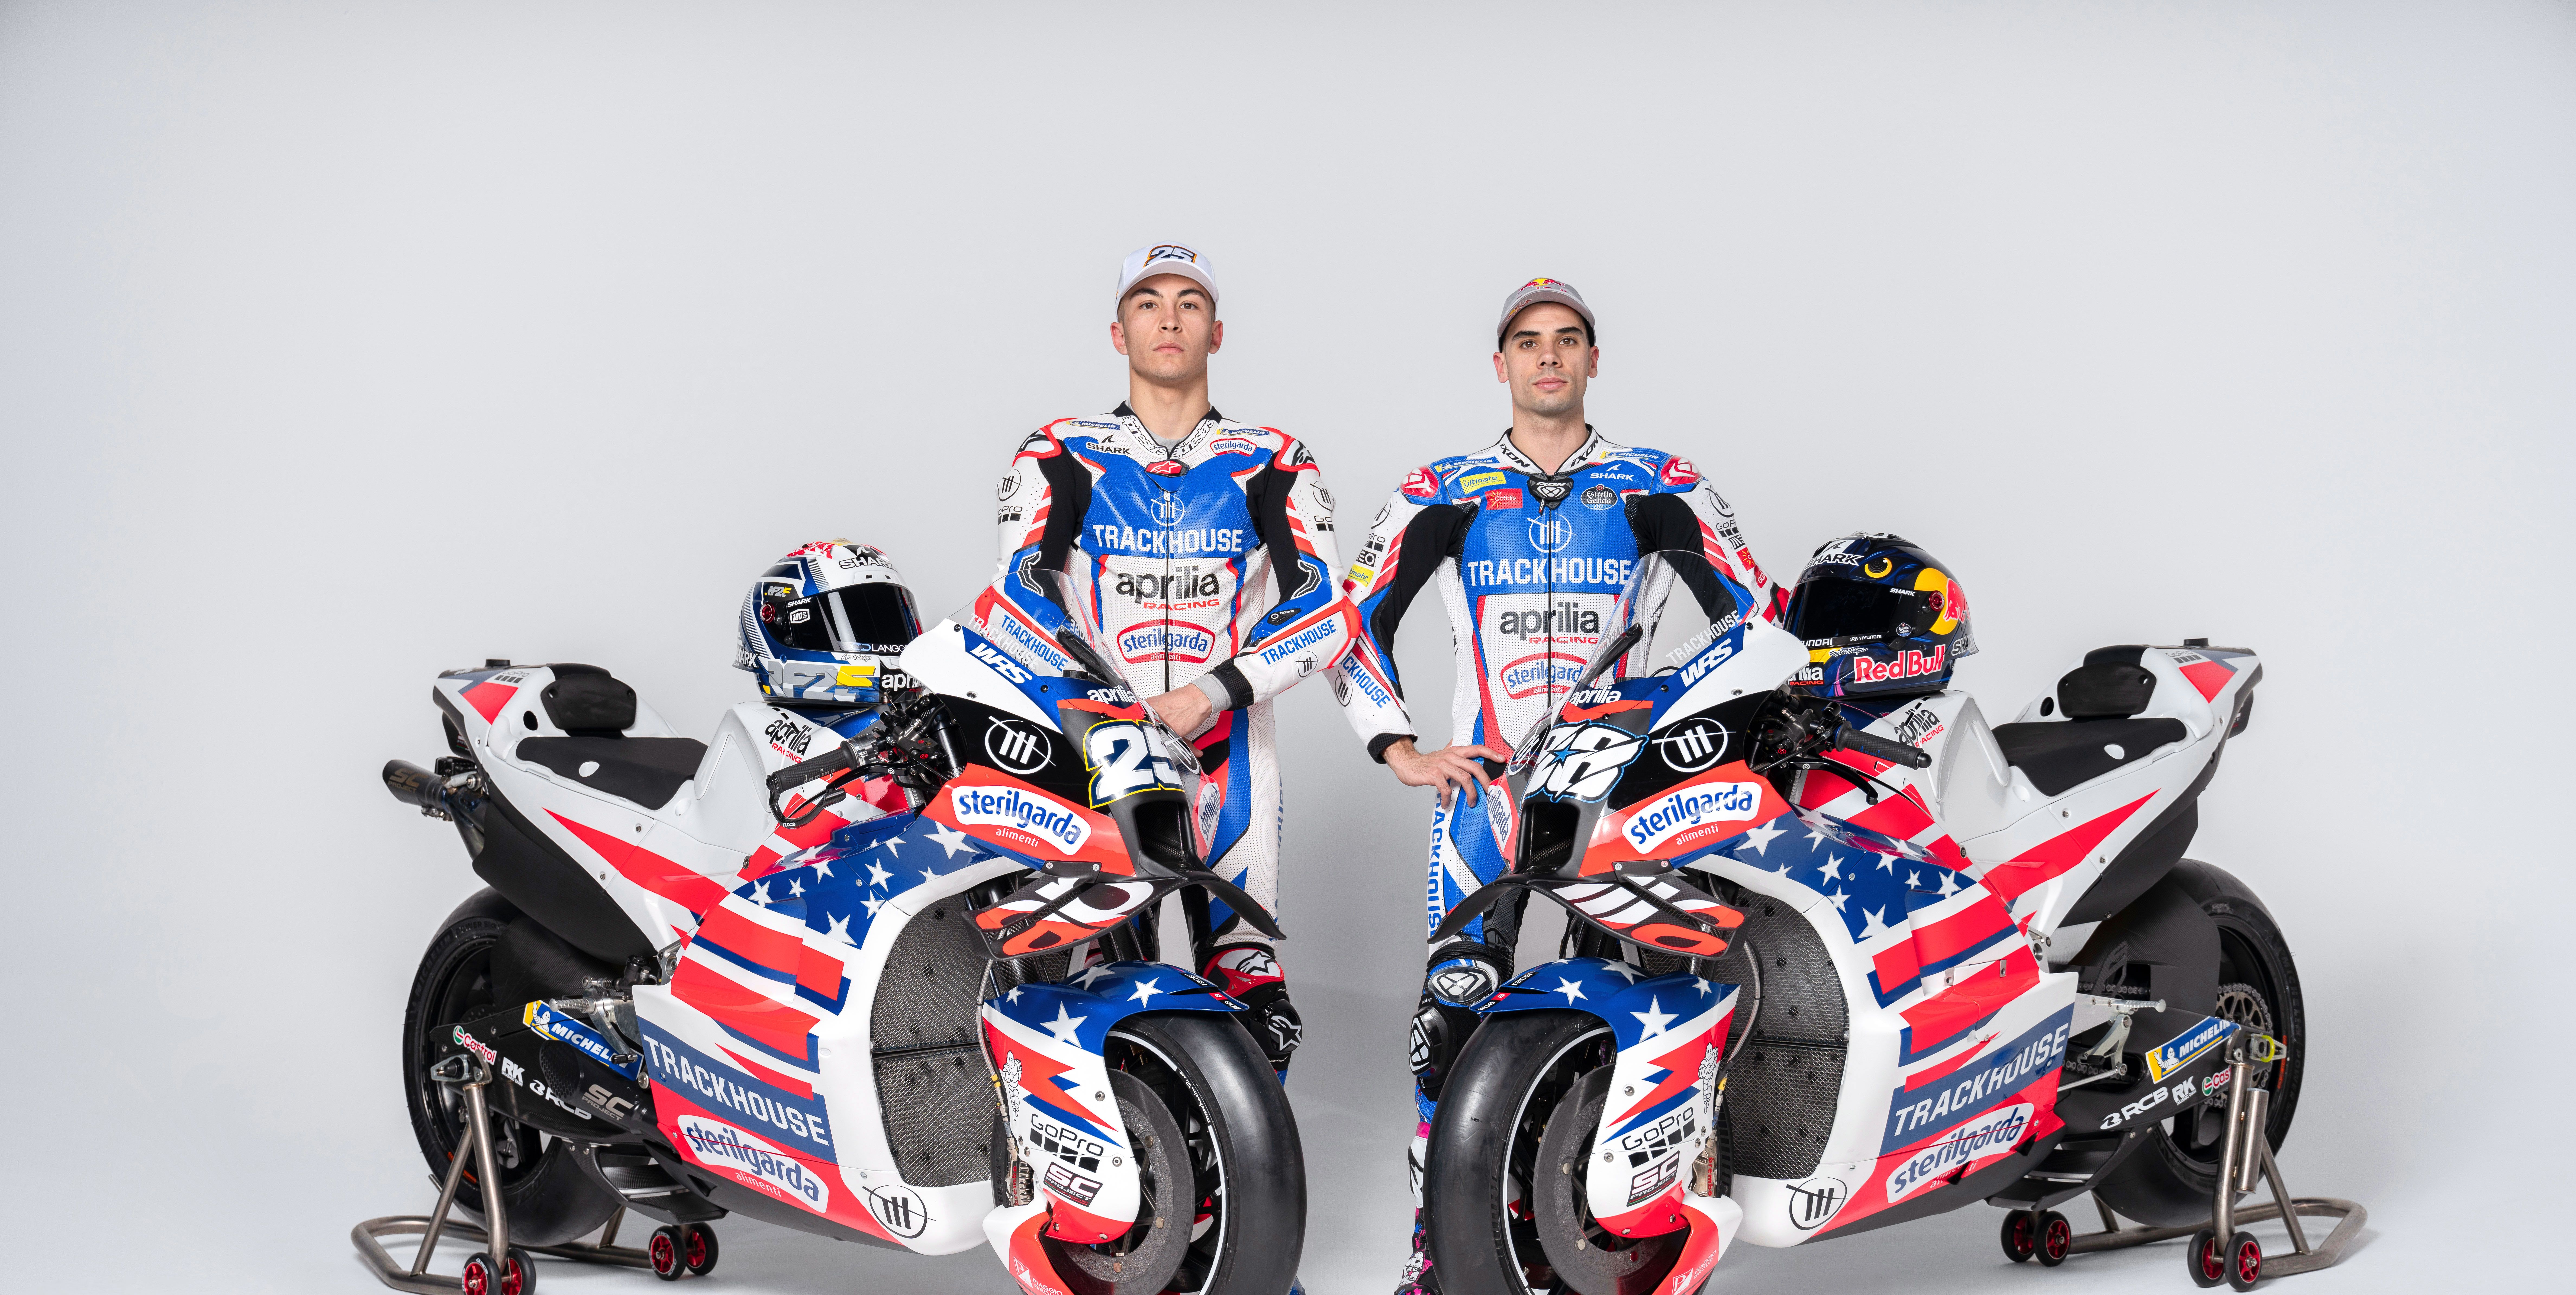 Trackhouse Racing Waves Stars and Stripes Livery for America's First Moto GP Entry